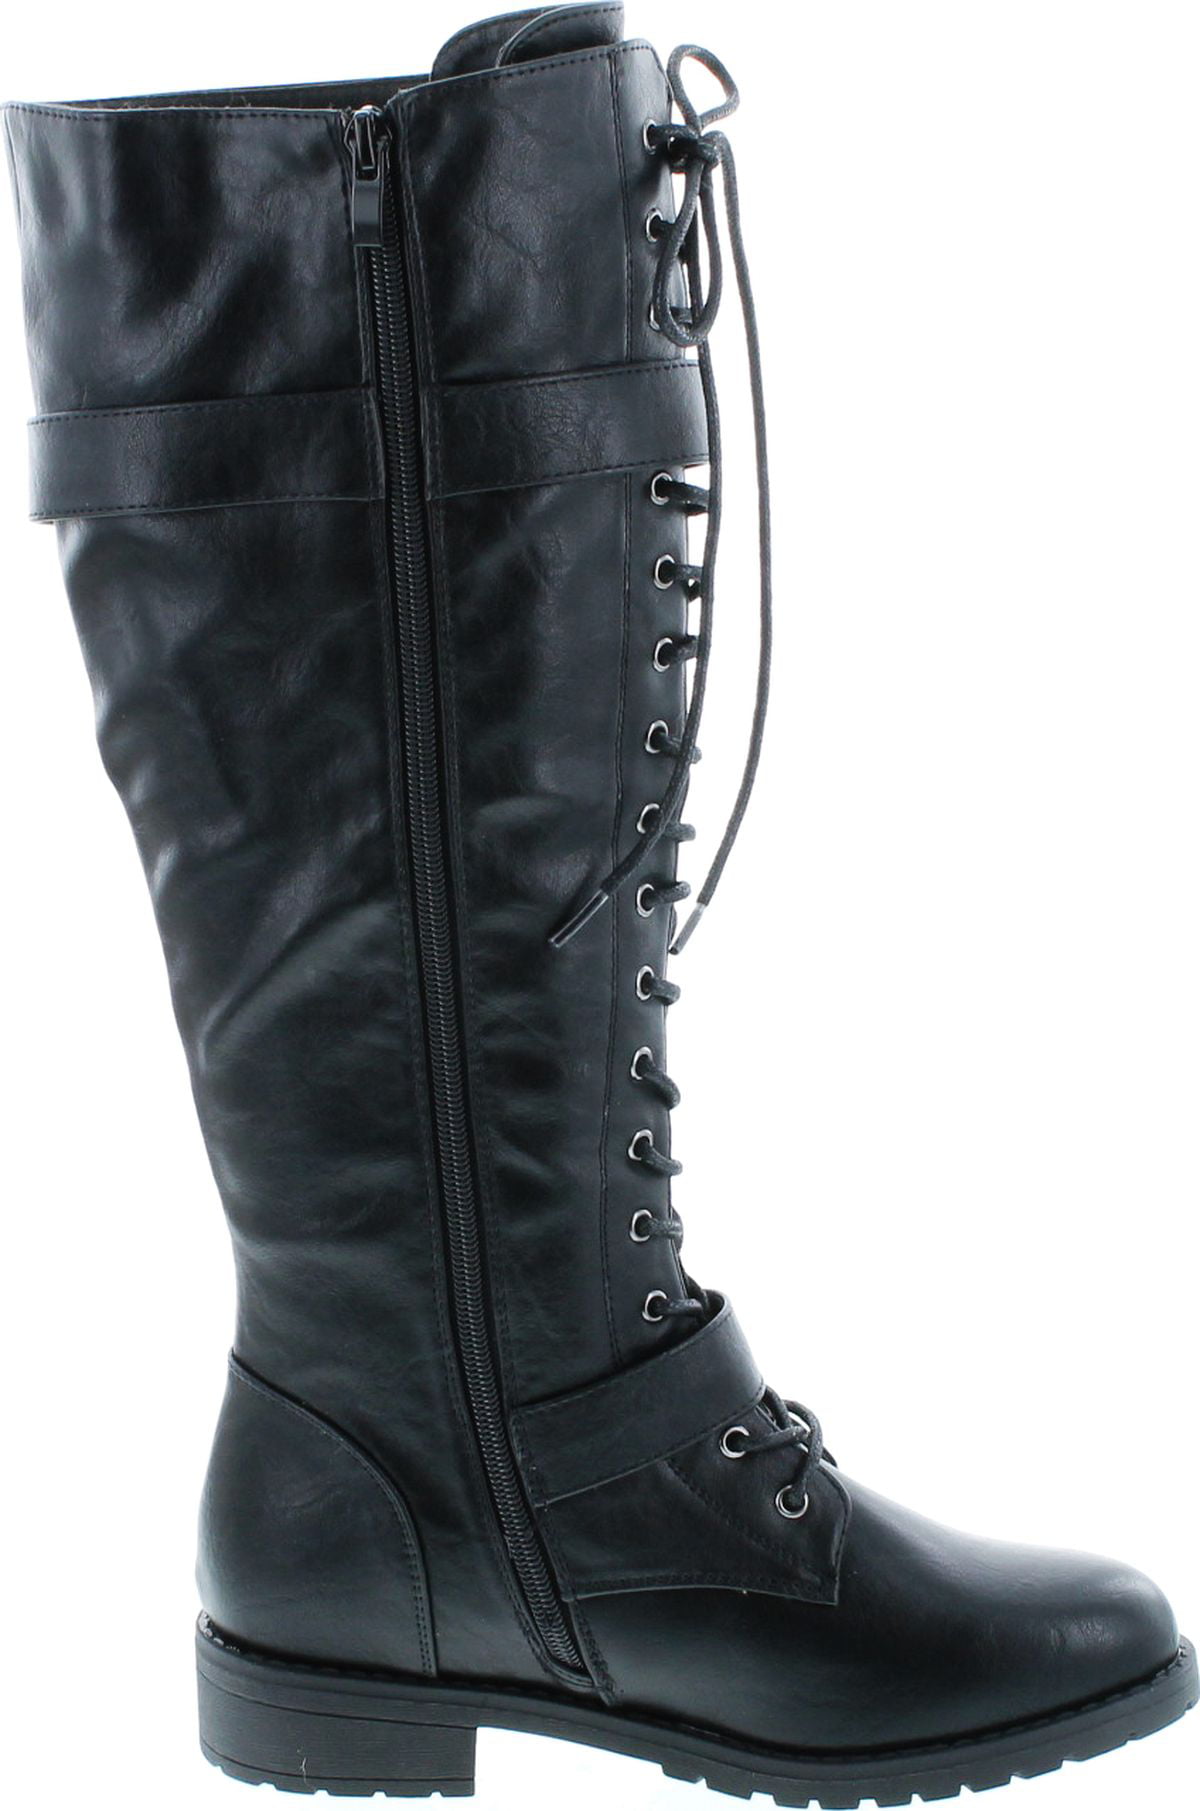 Details about   Women Knee High Boots Lace Up Combat Leather Buckle Straps Low Block Heel Shoes 